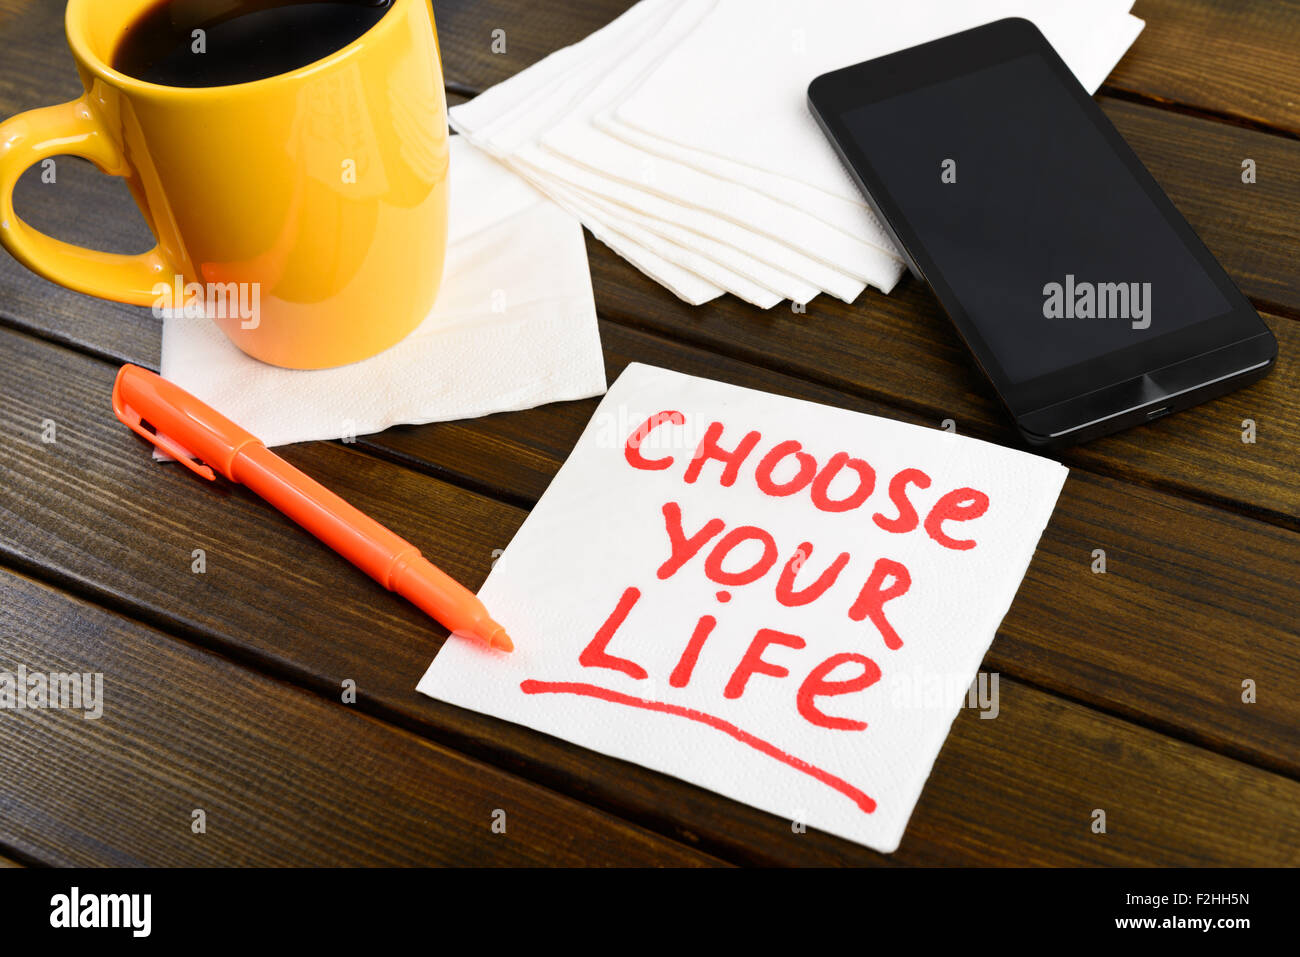 Choose your life writing on white napkin around coffee pen and phone on wooden table Stock Photo